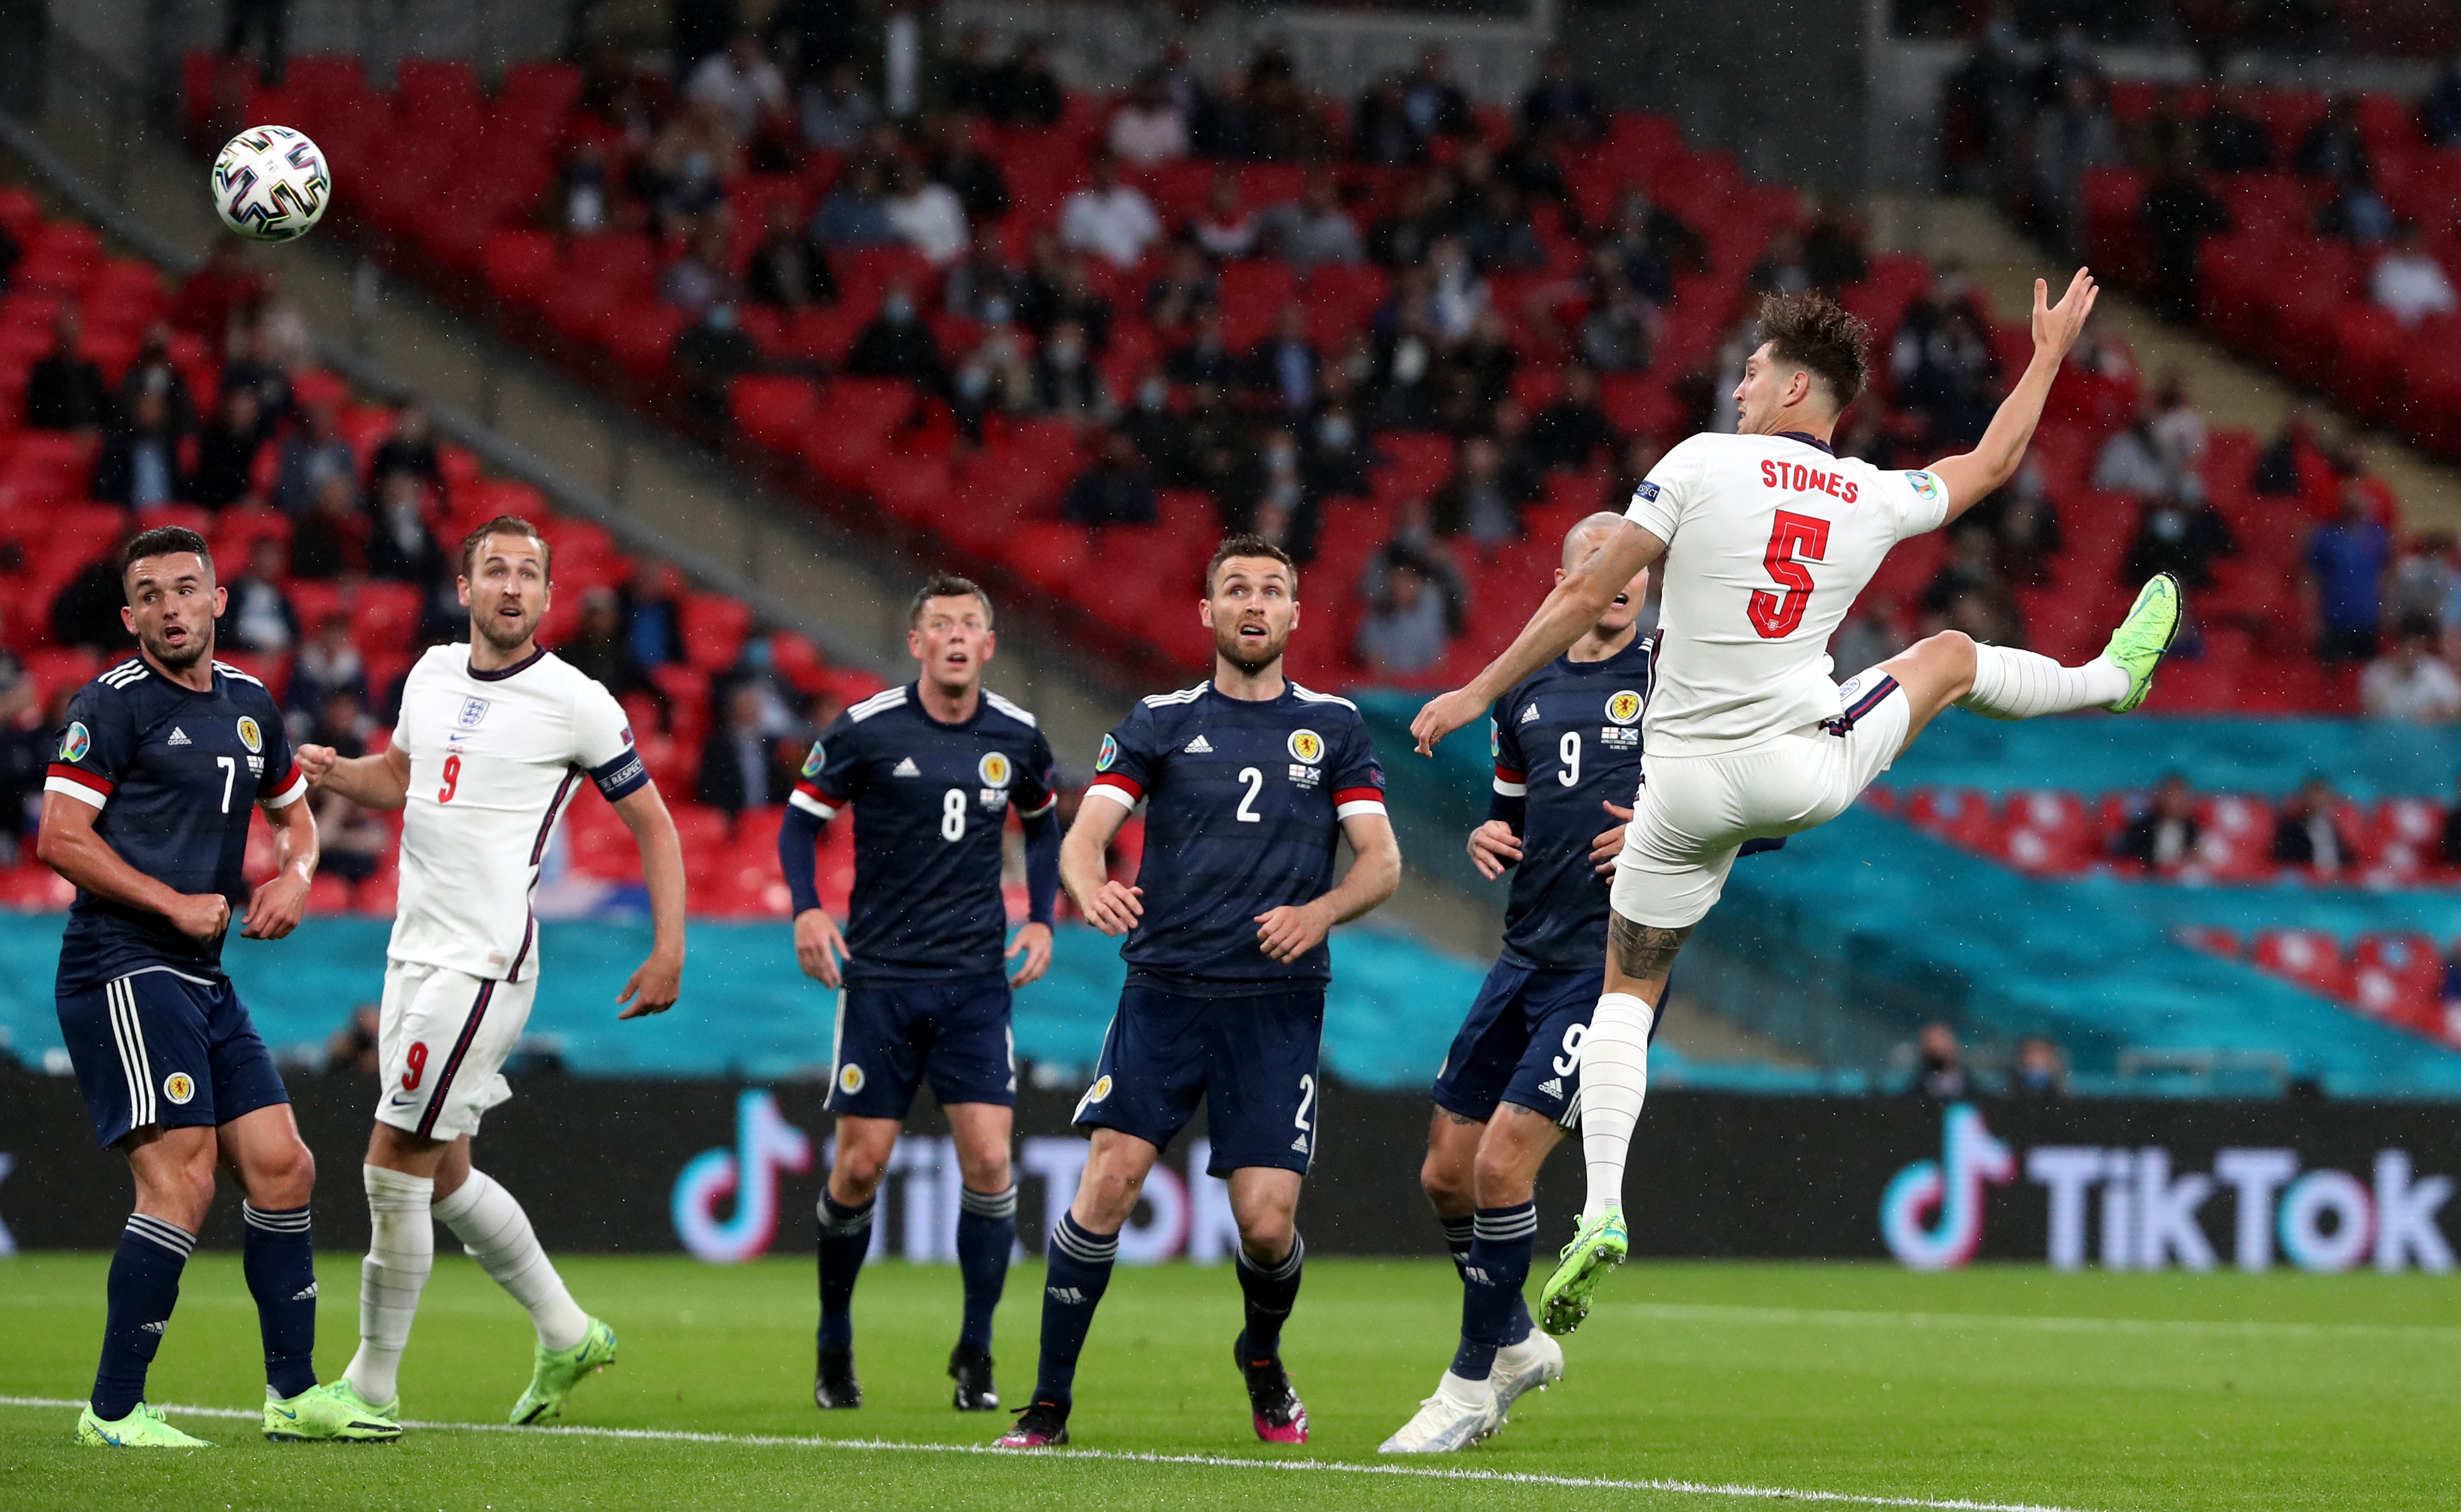 England defender John Stones, right, came closest to scoring against Scotland